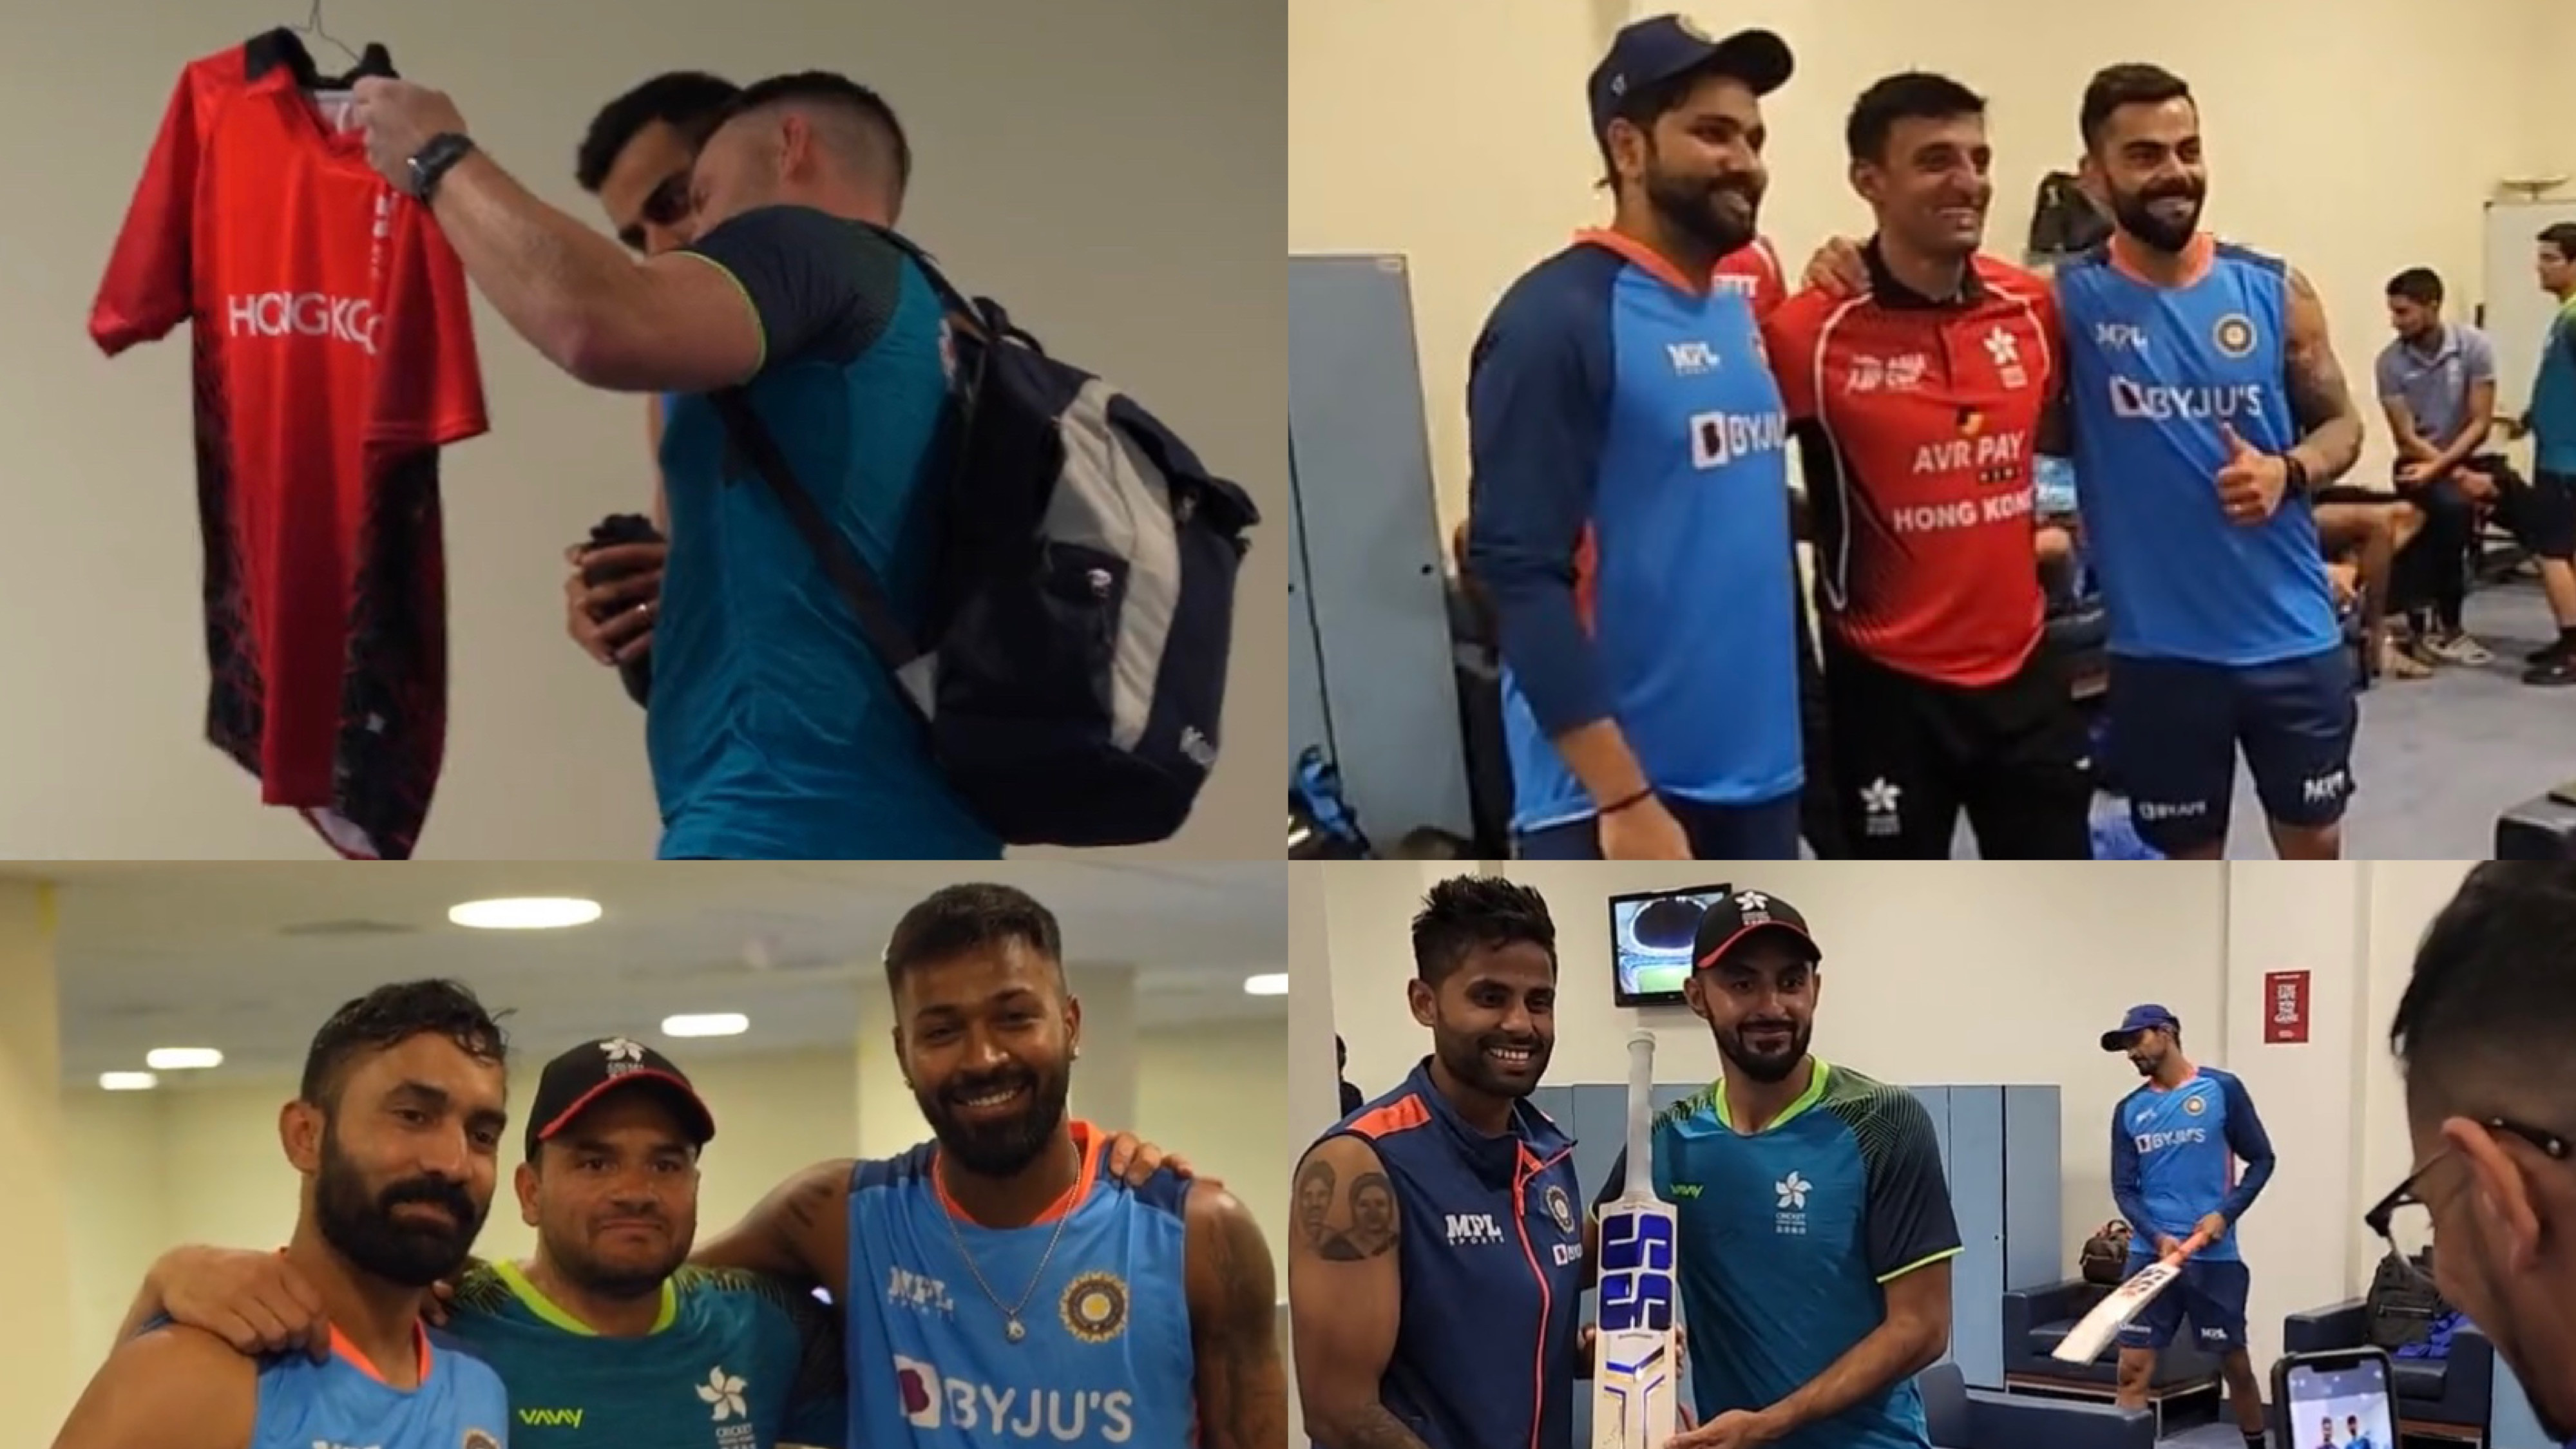 Asia Cup 2022: WATCH - Team Hong Kong visits Team India's dressing room after the clash in Dubai